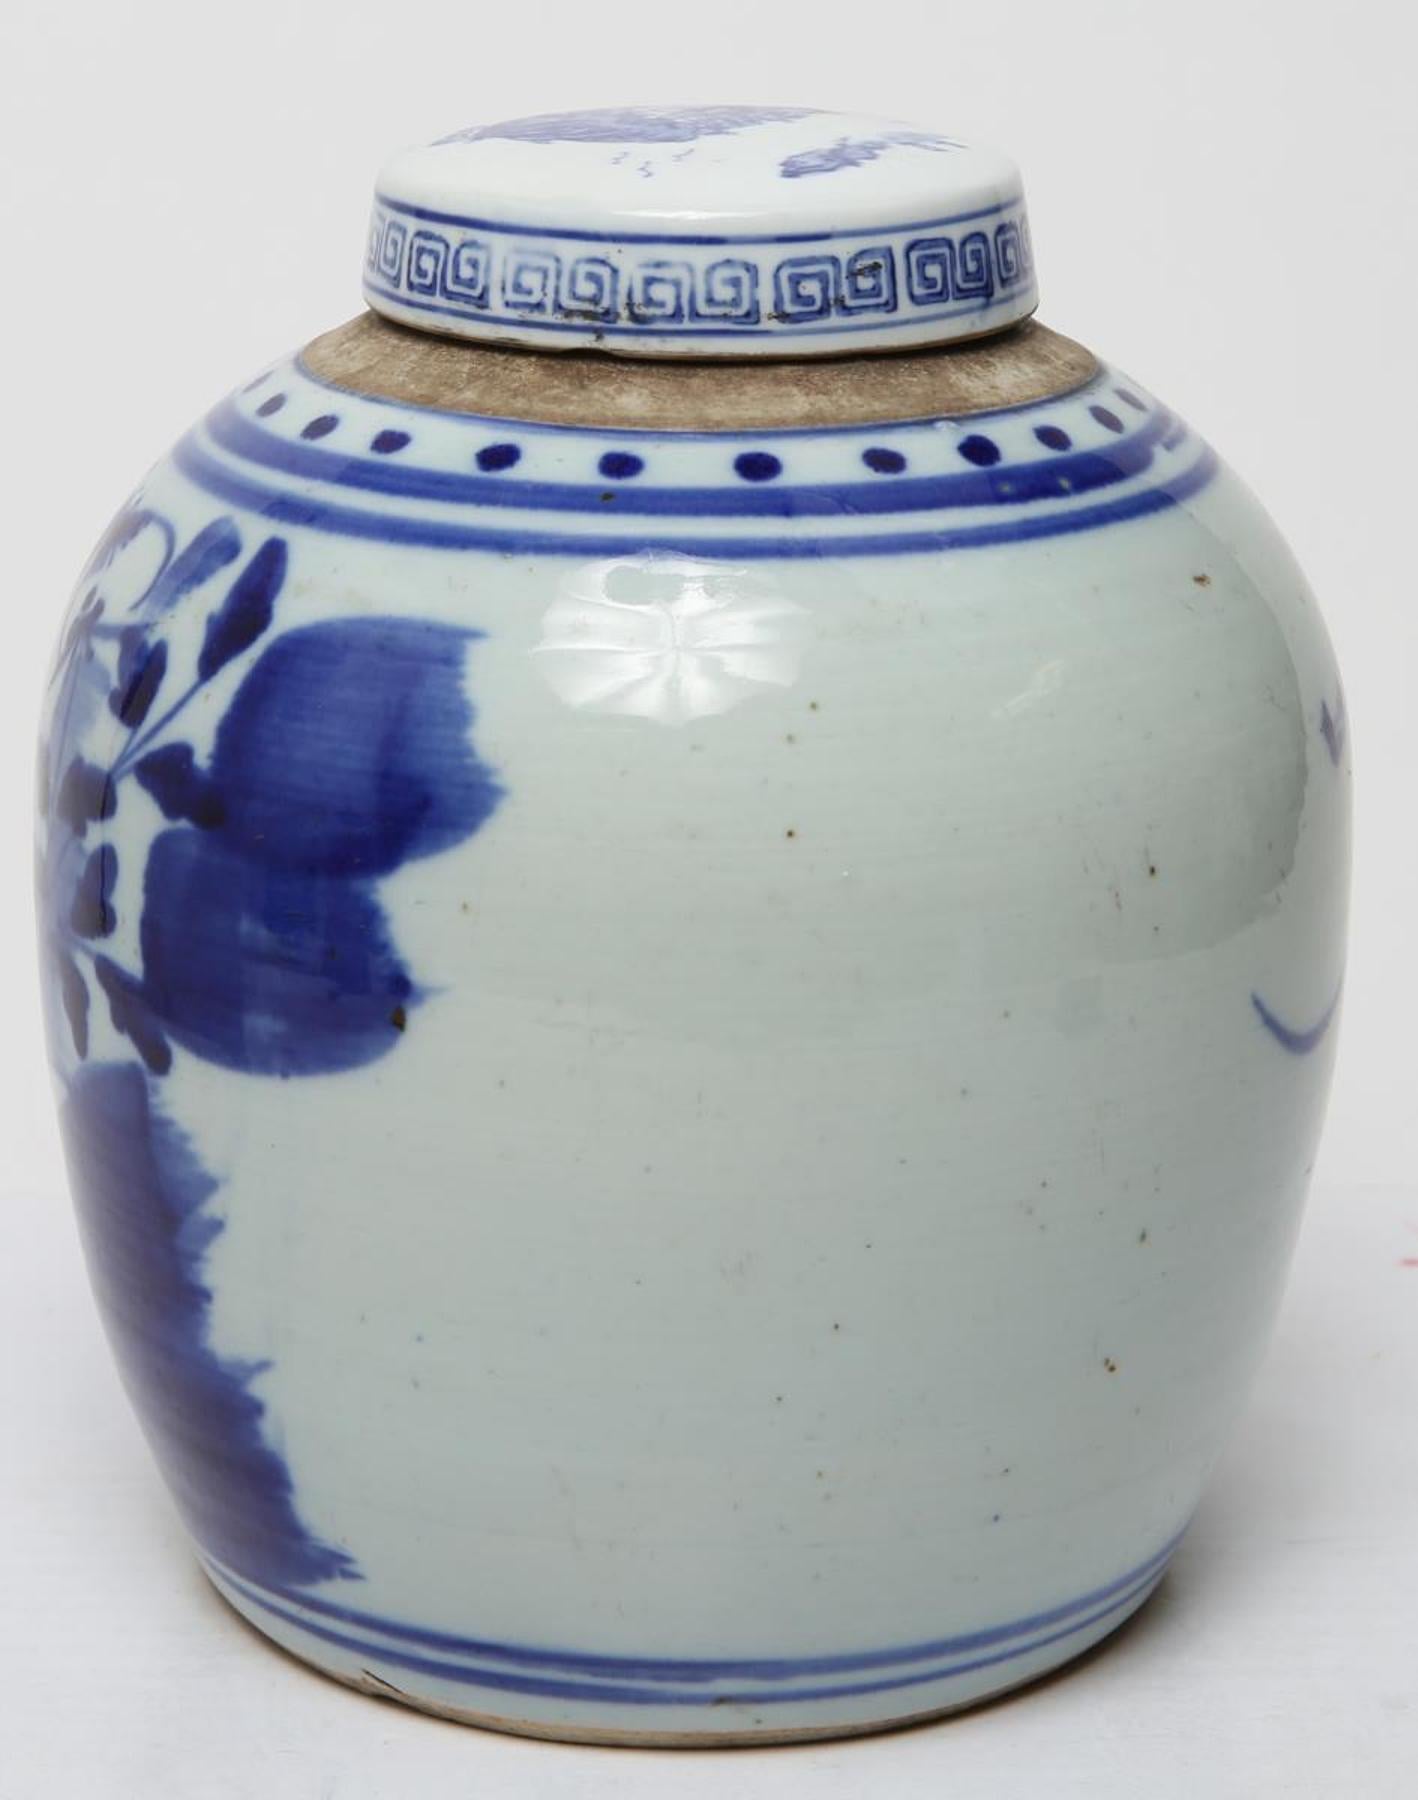 Chinese Qing dynasty ginger jar in underglaze blue and white porcelain, painted with lotus flowers, buds and pods; the lid with tiny landscape and Greek key border. In good vintage condition.